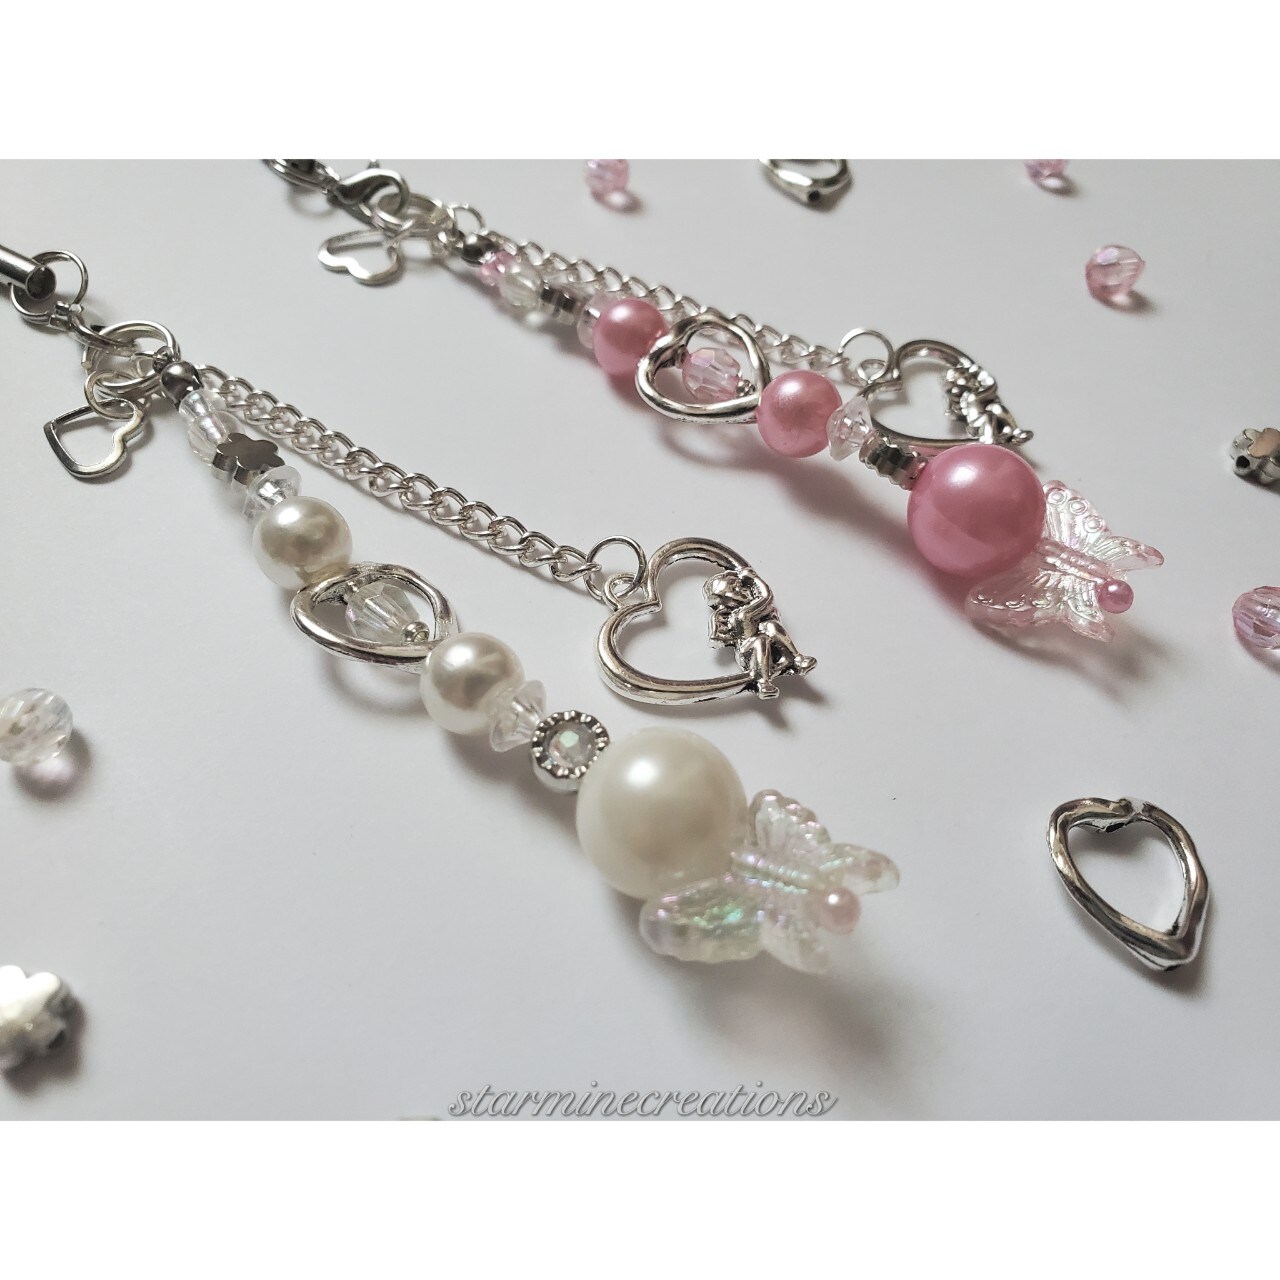 Pearly Angels Phone Strap ~ Beaded Keychain Charm Cute Girly Alt Coquette  Kawaii Y2k Aesthetic